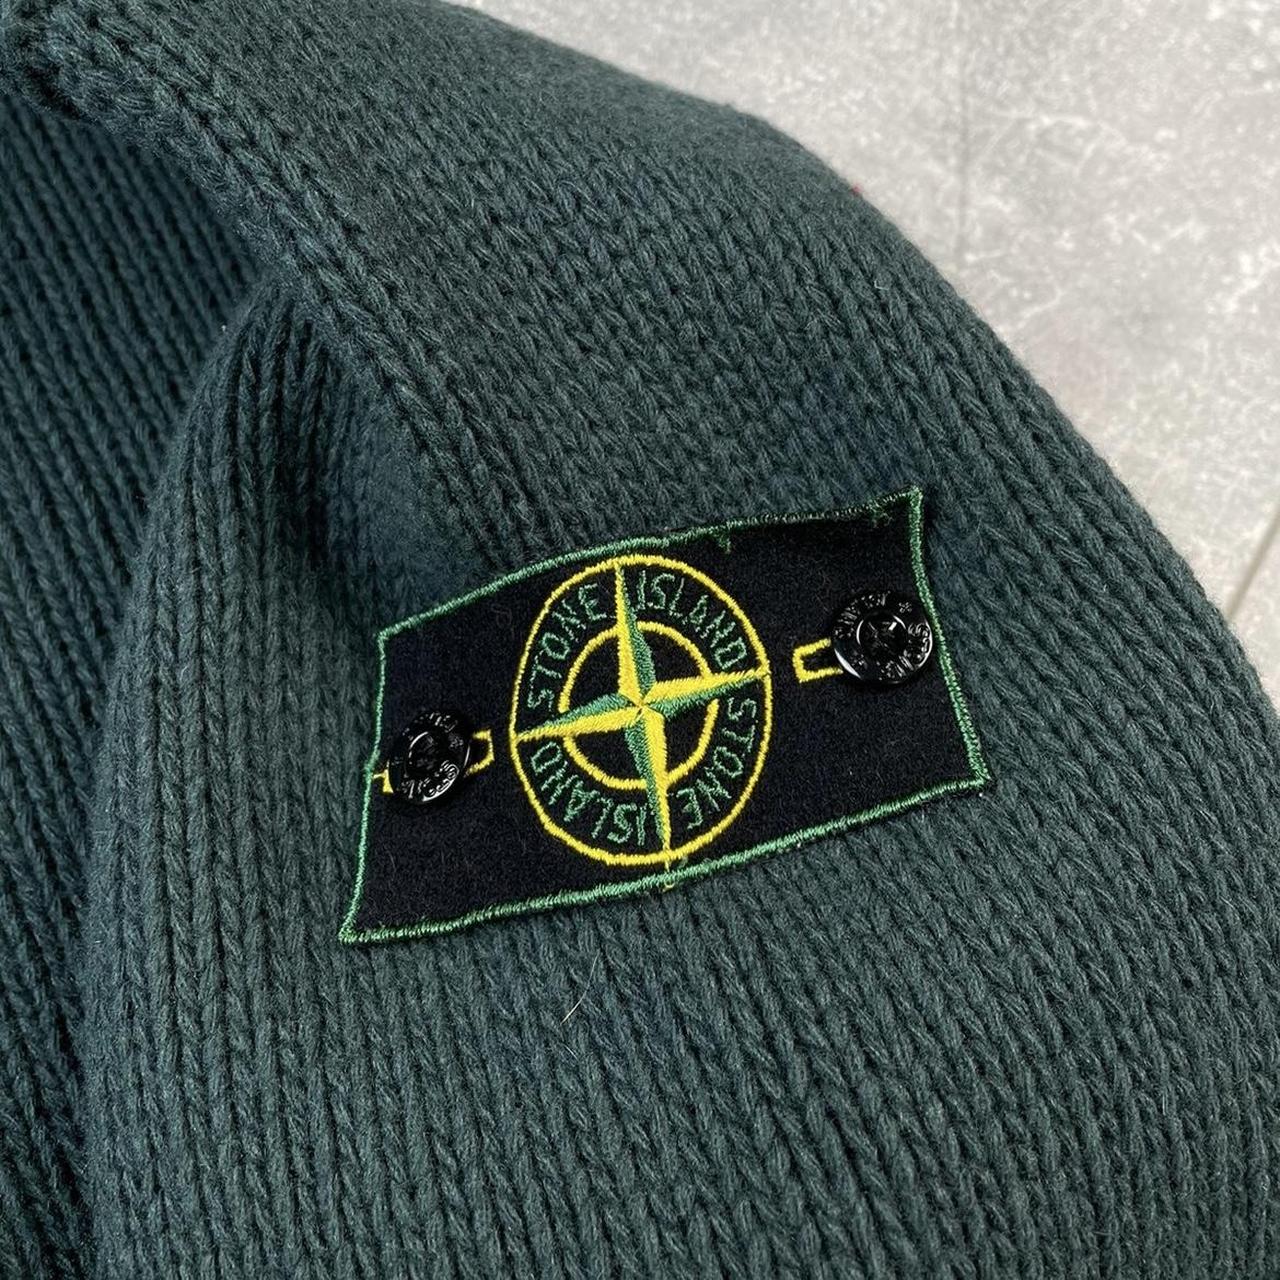 Stone Island Super Rare Vintage Wool Knit Size Large fits Large to XL AW1996